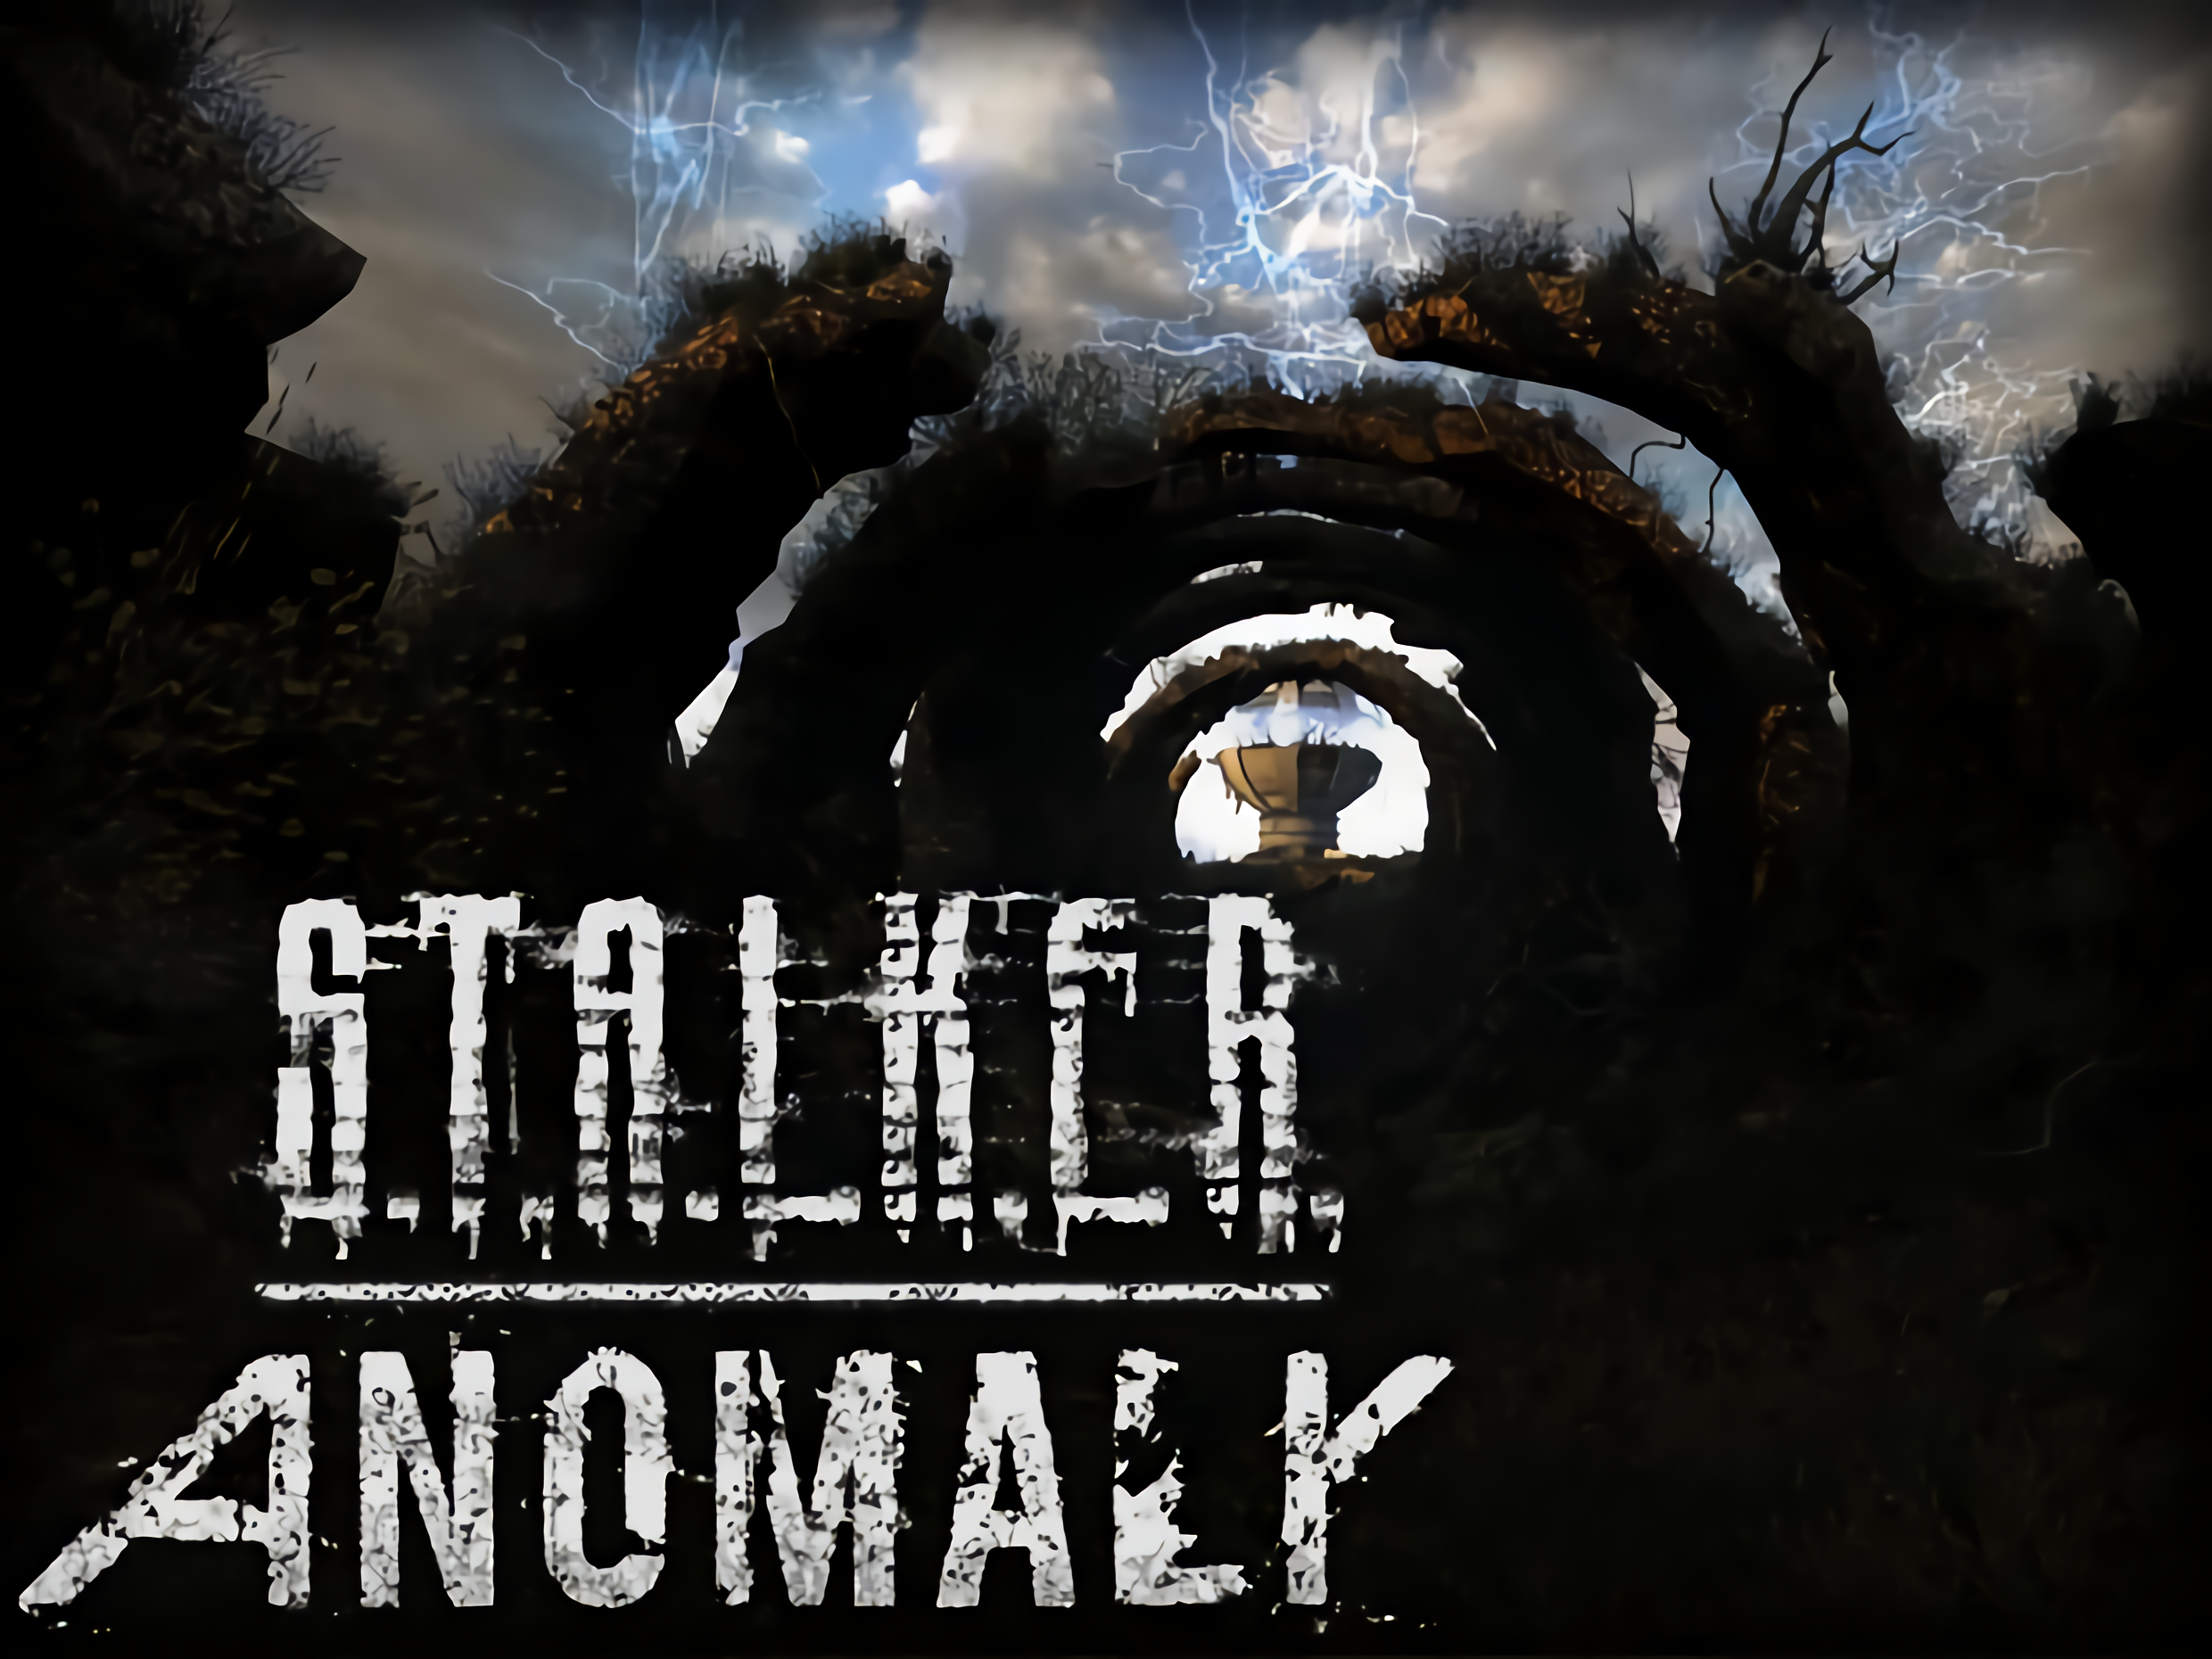 Call of chernobyl anomaly. Сталкер аномалия 1.5.0. S.T.A.L.K.E.R. Anomaly 1.5.2. Сталкер аномали обложка. Сталкер Anomaly 1.5.